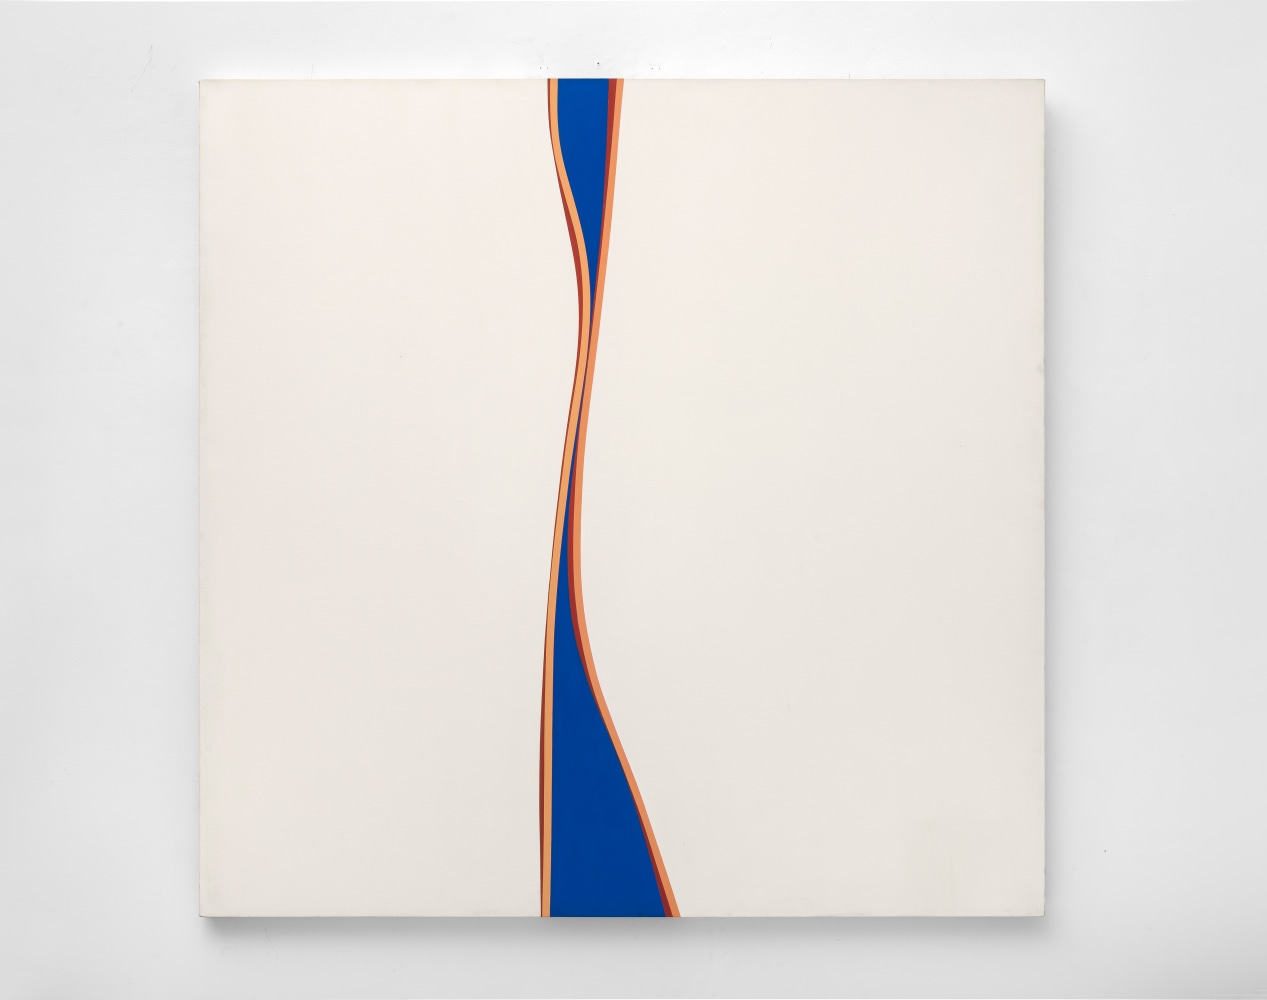 Lorser Feitelson (1898-1978) Untitled (January 30), 1971 acrylic on canvas 60 x 60 inches; 152.4 x 152.4 centimeters LSFA# 01350